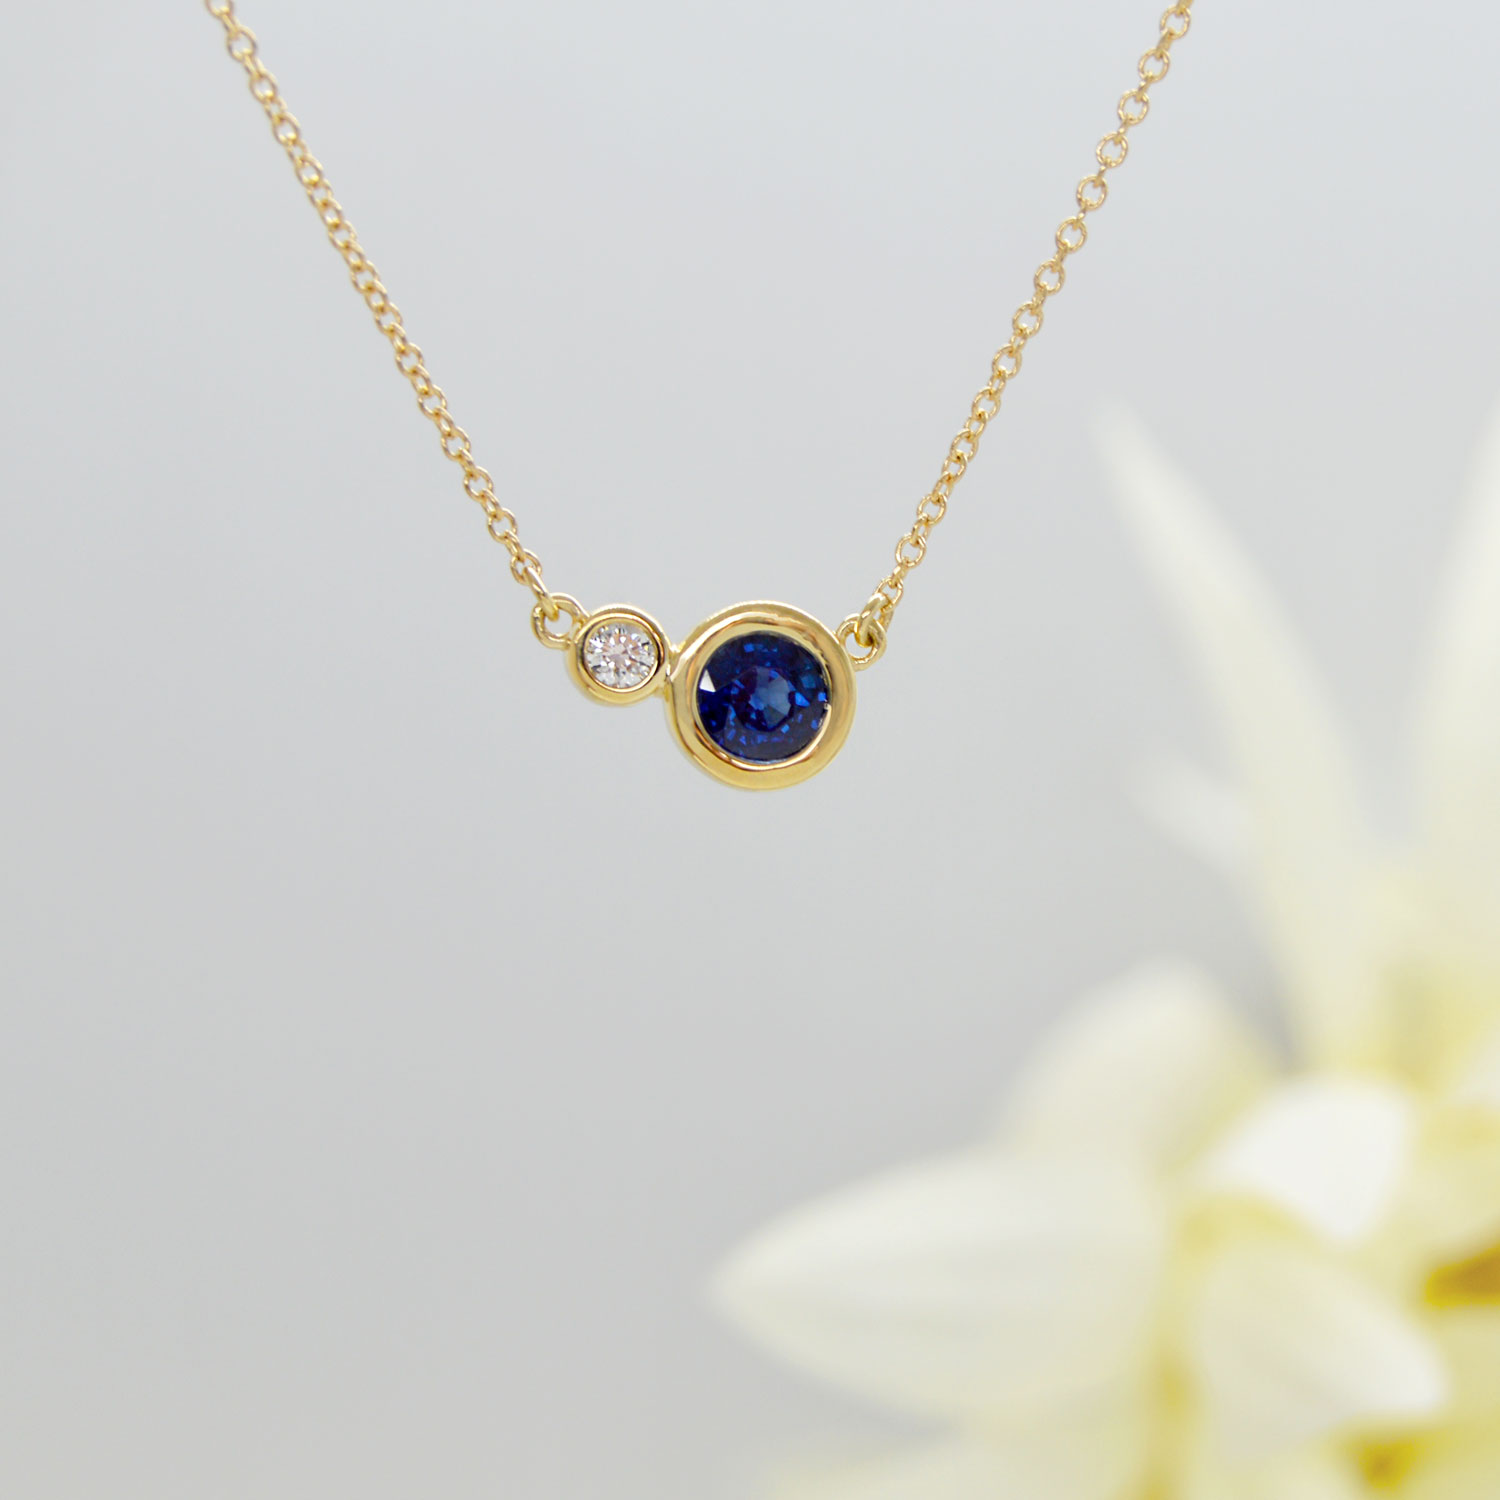 Yellow Sapphire Necklace in Gold | KLENOTA